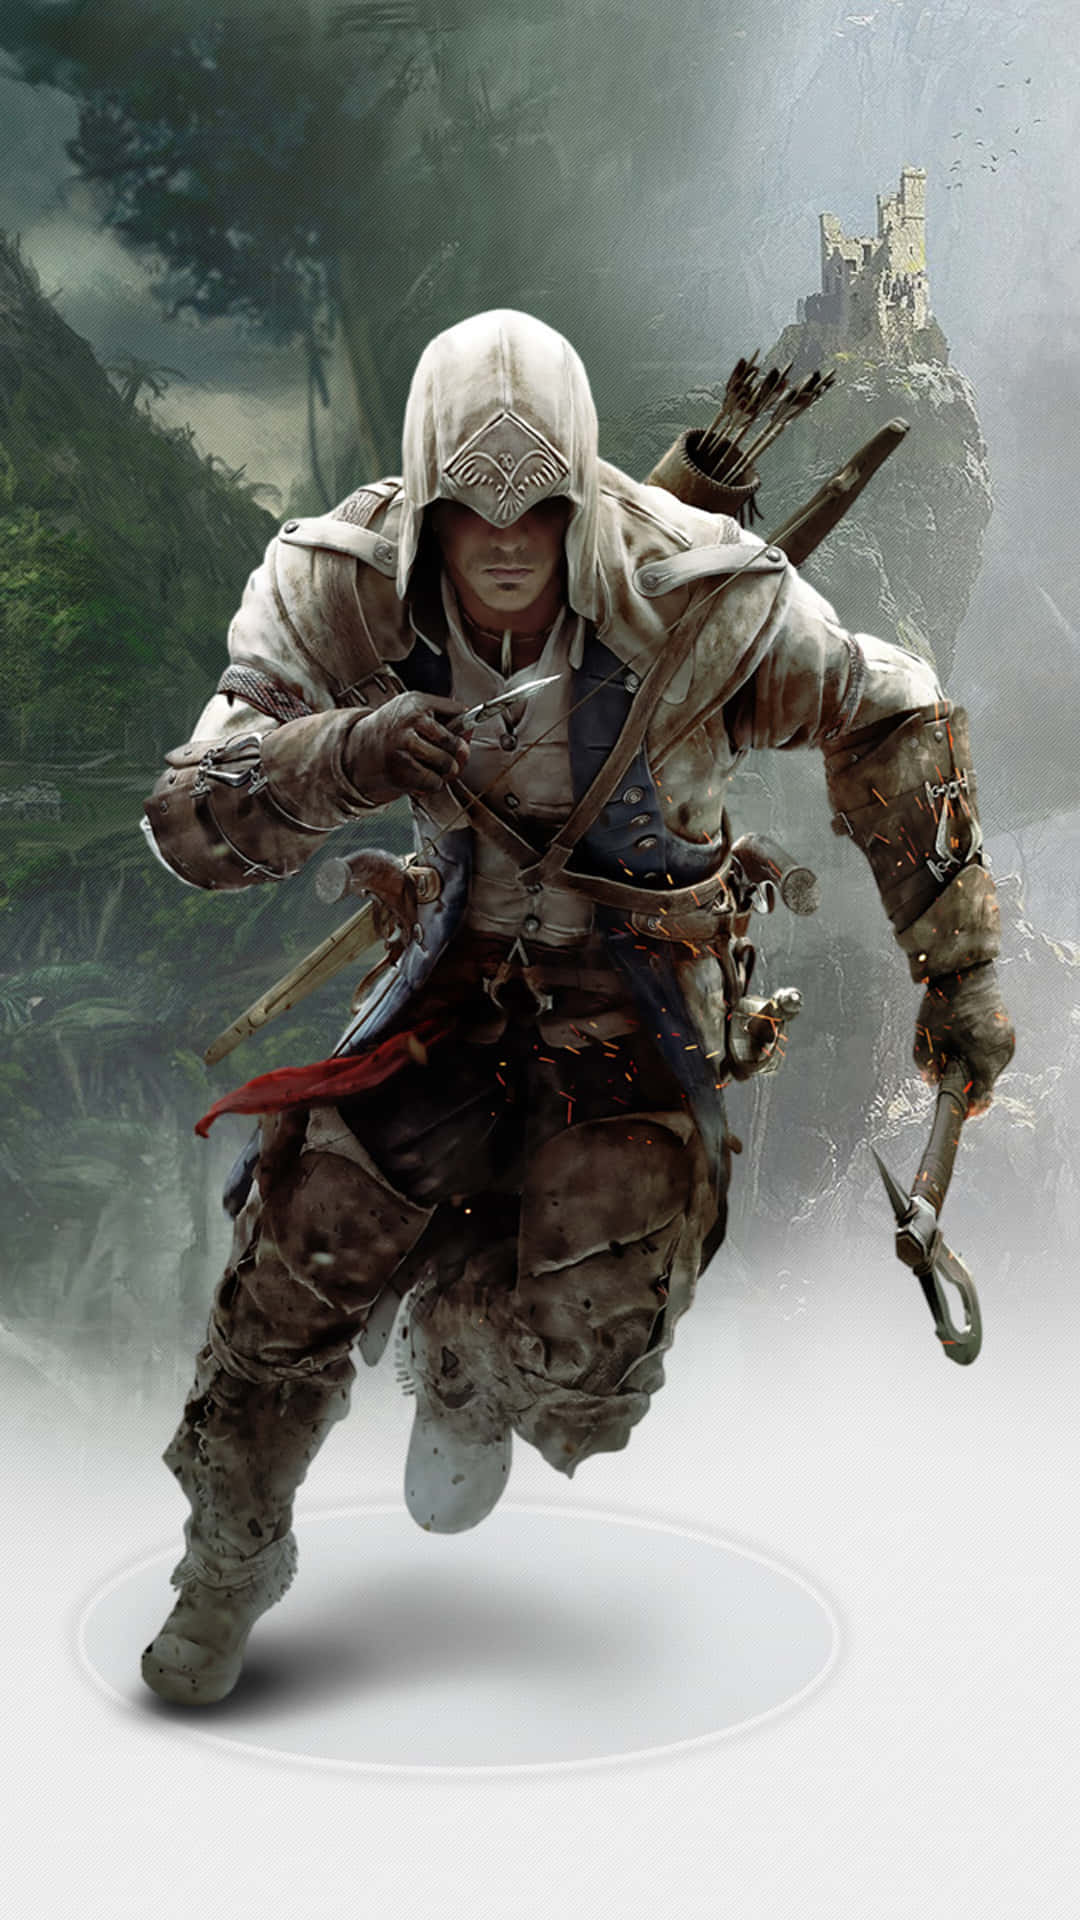 Assassin's Creed 3 iPhone 5 Wallpaper